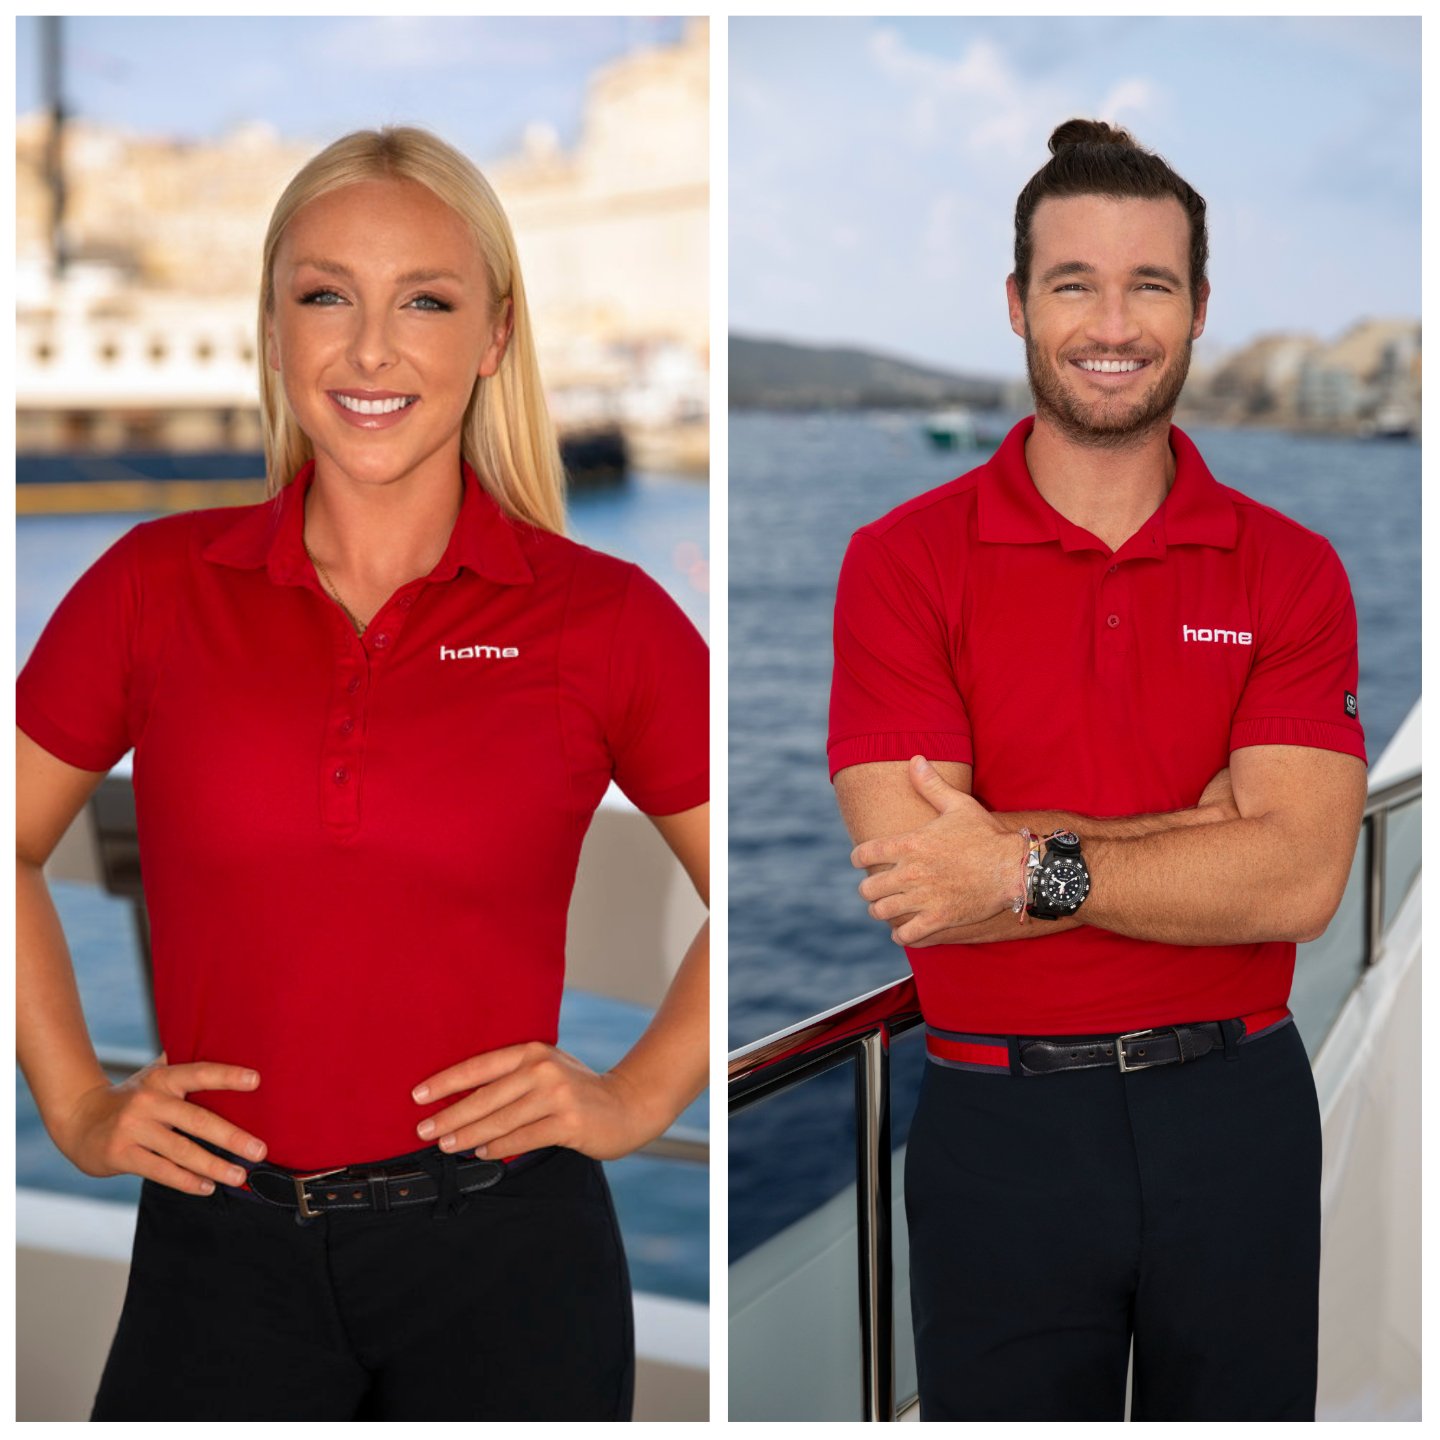 Courtney Veale and Jason Gaskell 'Below Deck Med' cast photos